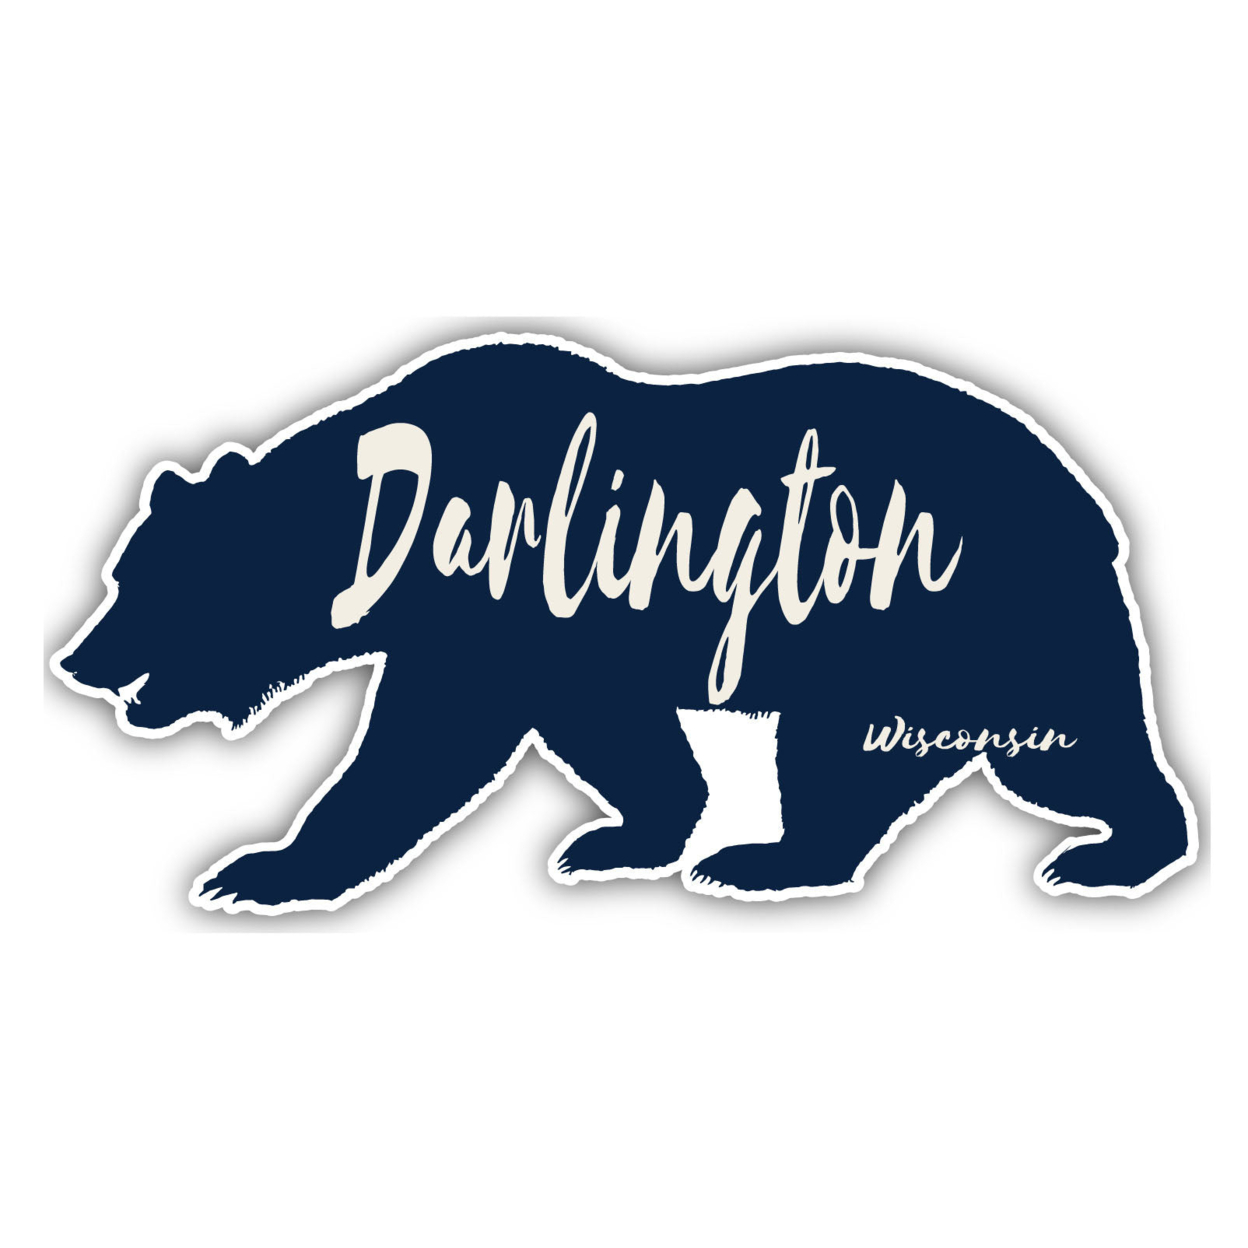 Darlington Wisconsin Souvenir Decorative Stickers (Choose Theme And Size) - 4-Pack, 2-Inch, Bear